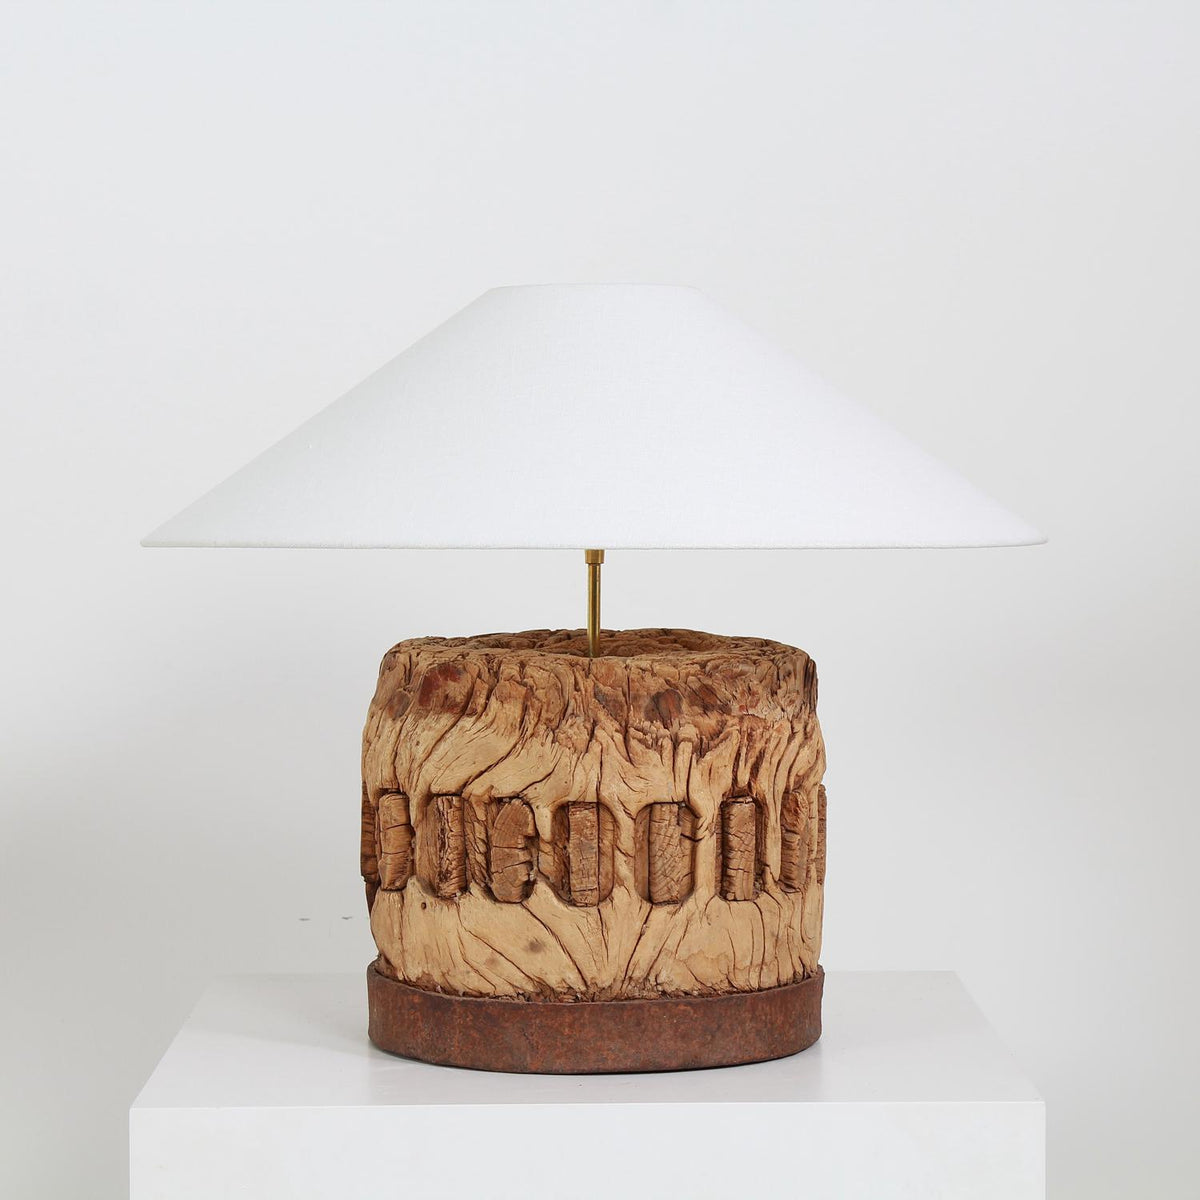 MAGNIFICENT LAMP FASHIONED FROM AN ANTIQUE ARCHITECTURAL WOODEN FRAGMENT